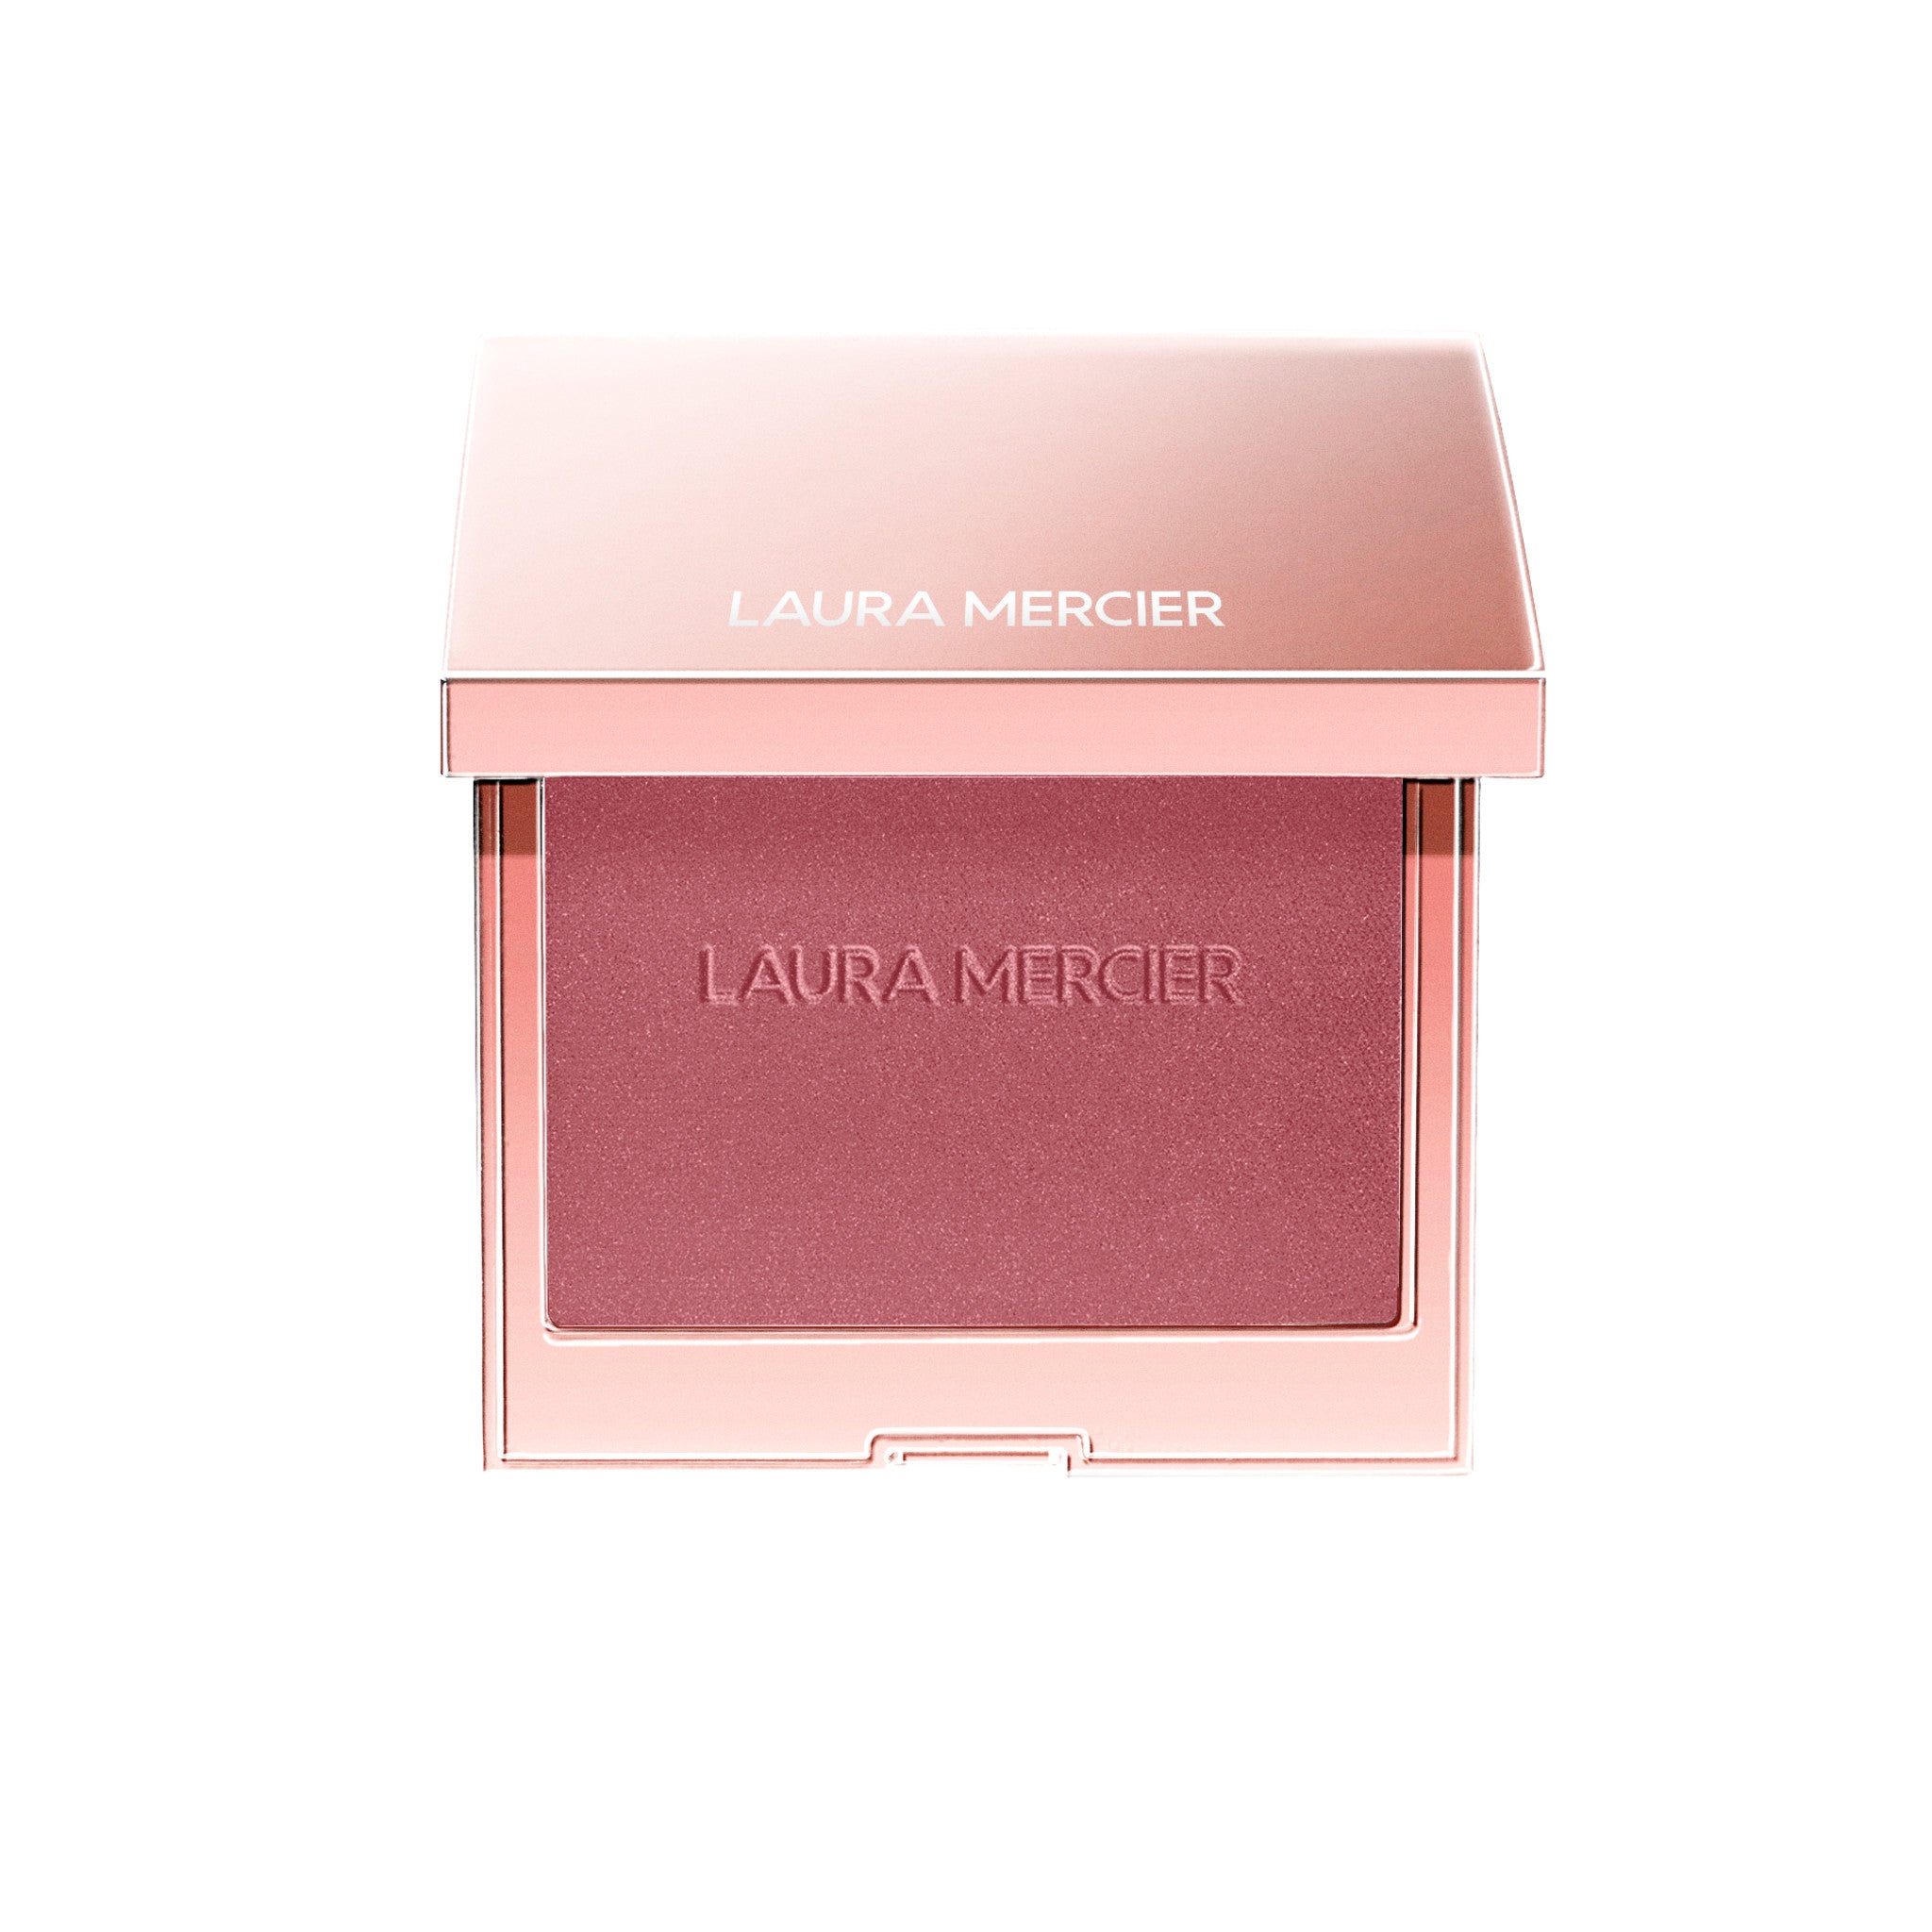 Laura Mercier RoseGlow Blush Color Infusion Color/Shade variant: Very Berry main image. This product is in the color berry